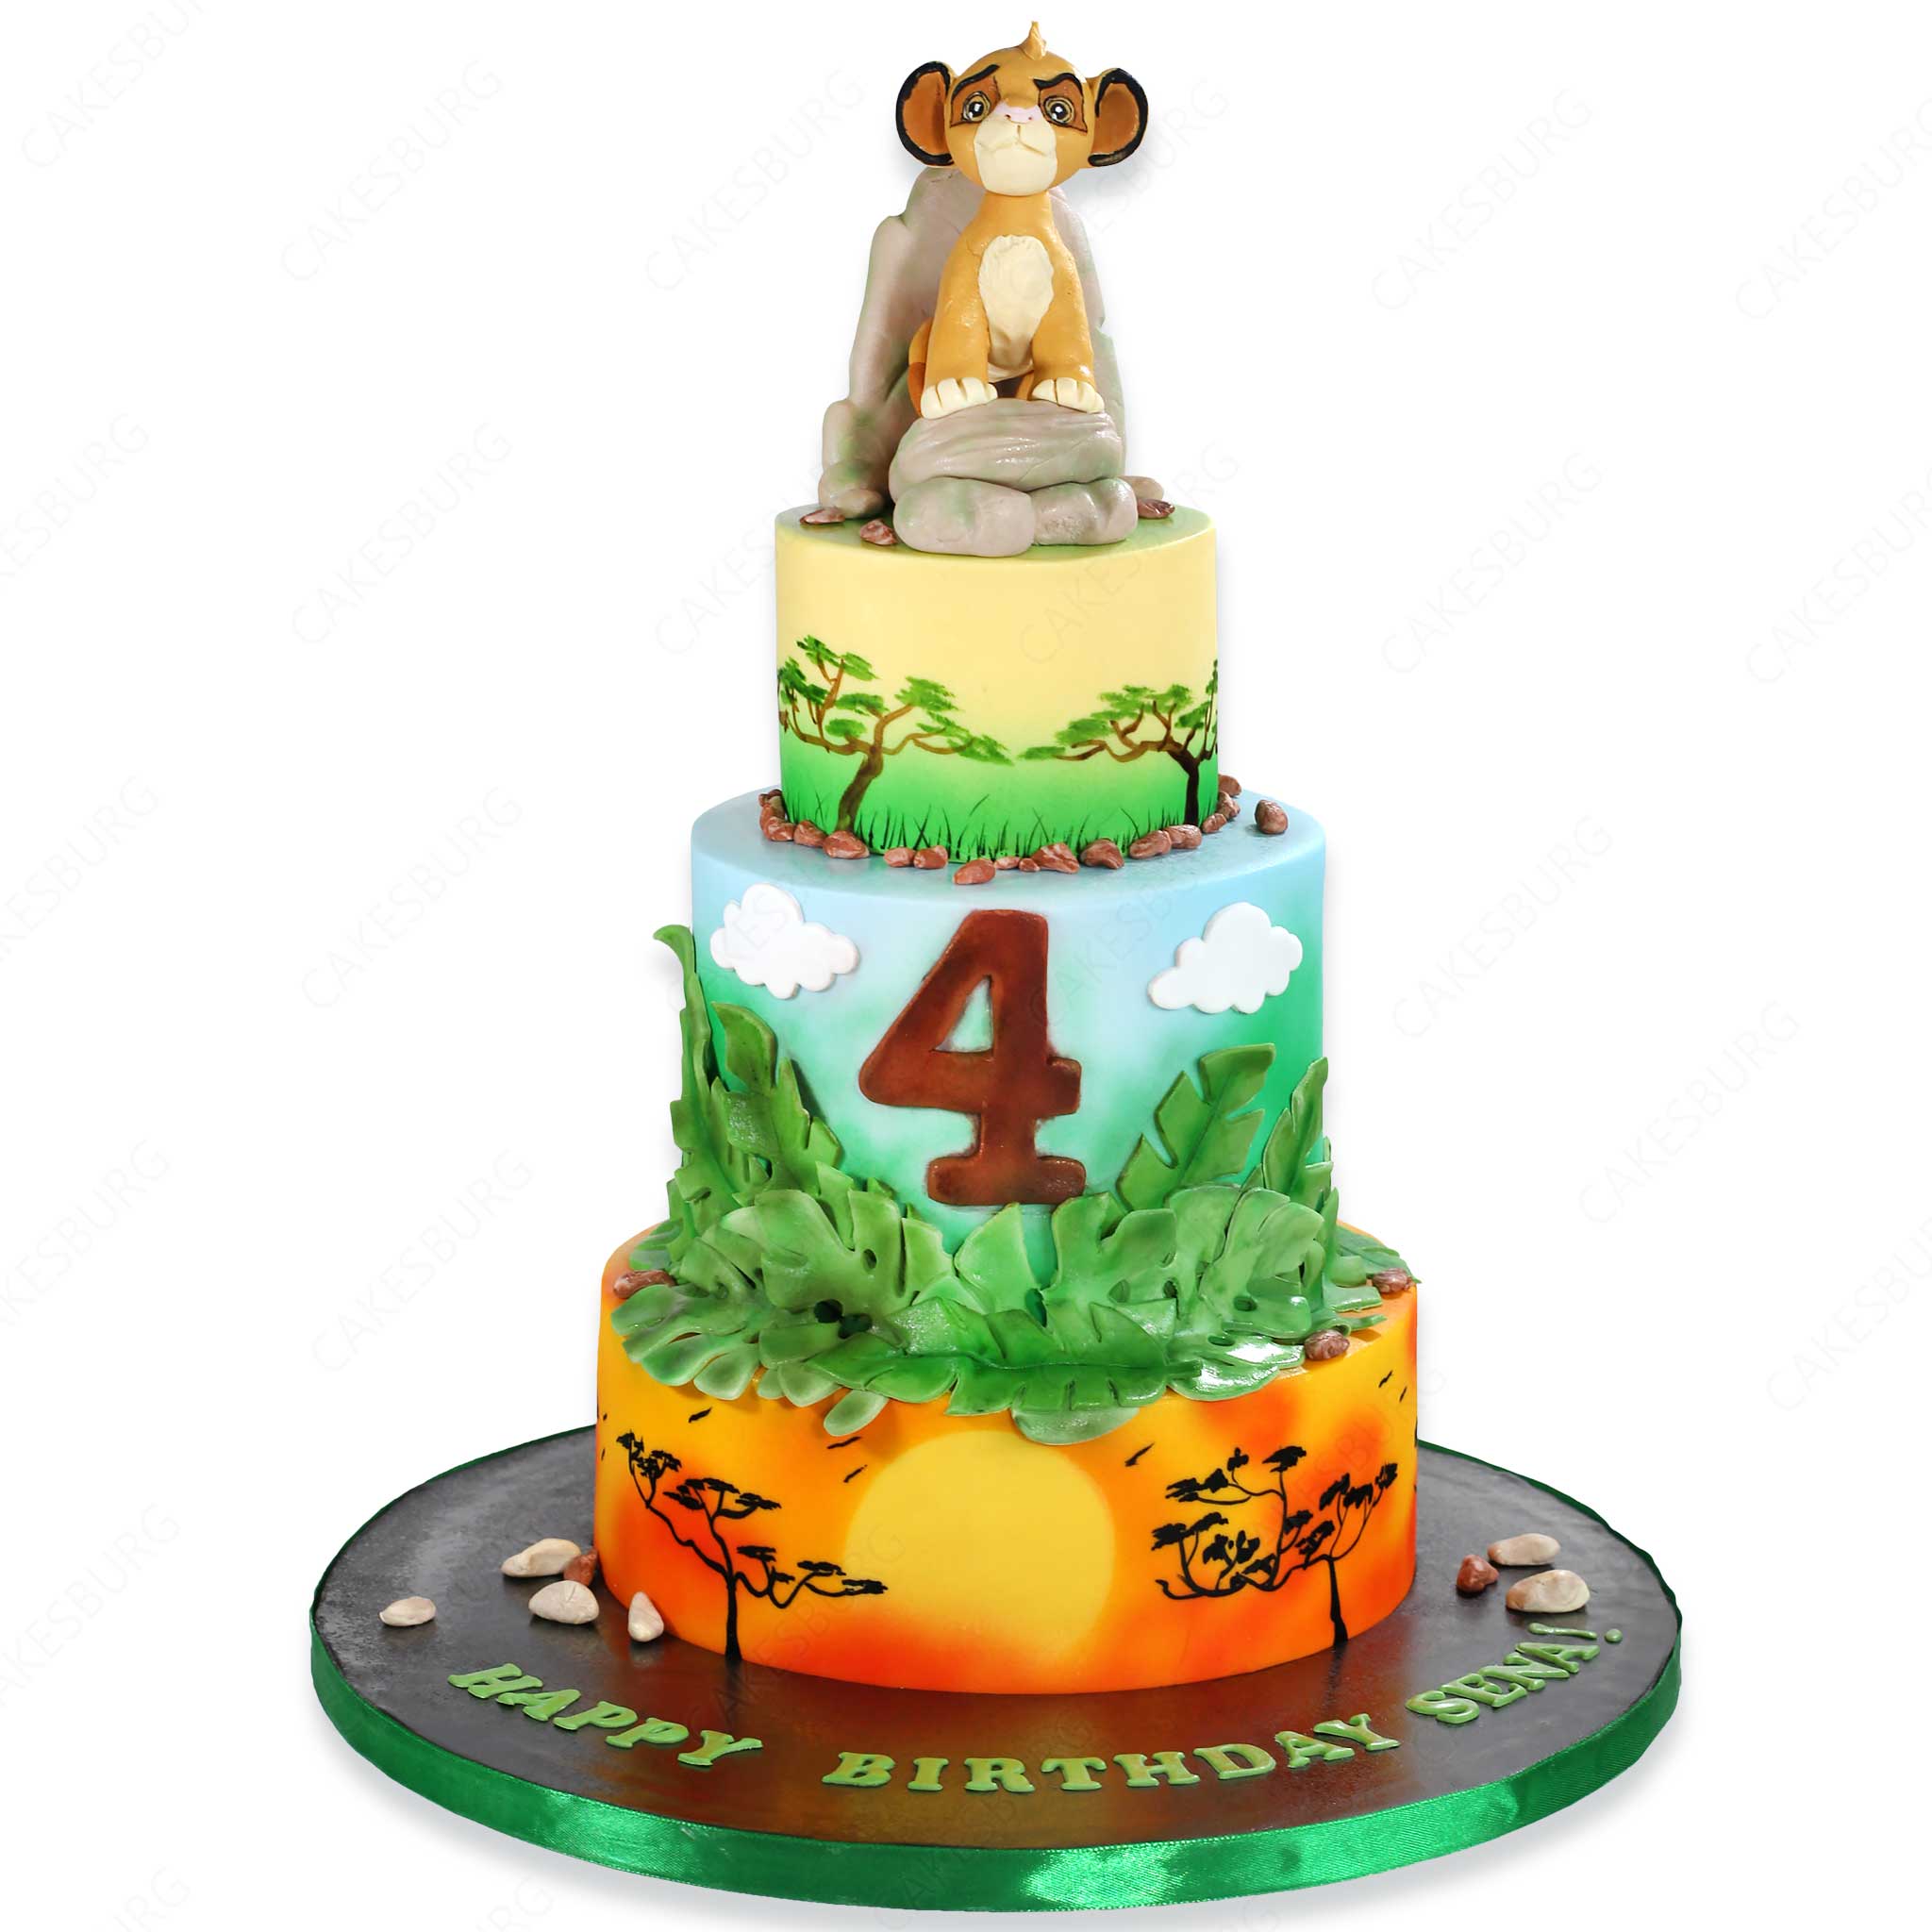 Lion King theme cake - Decorated Cake by Oven 180 Degrees - CakesDecor